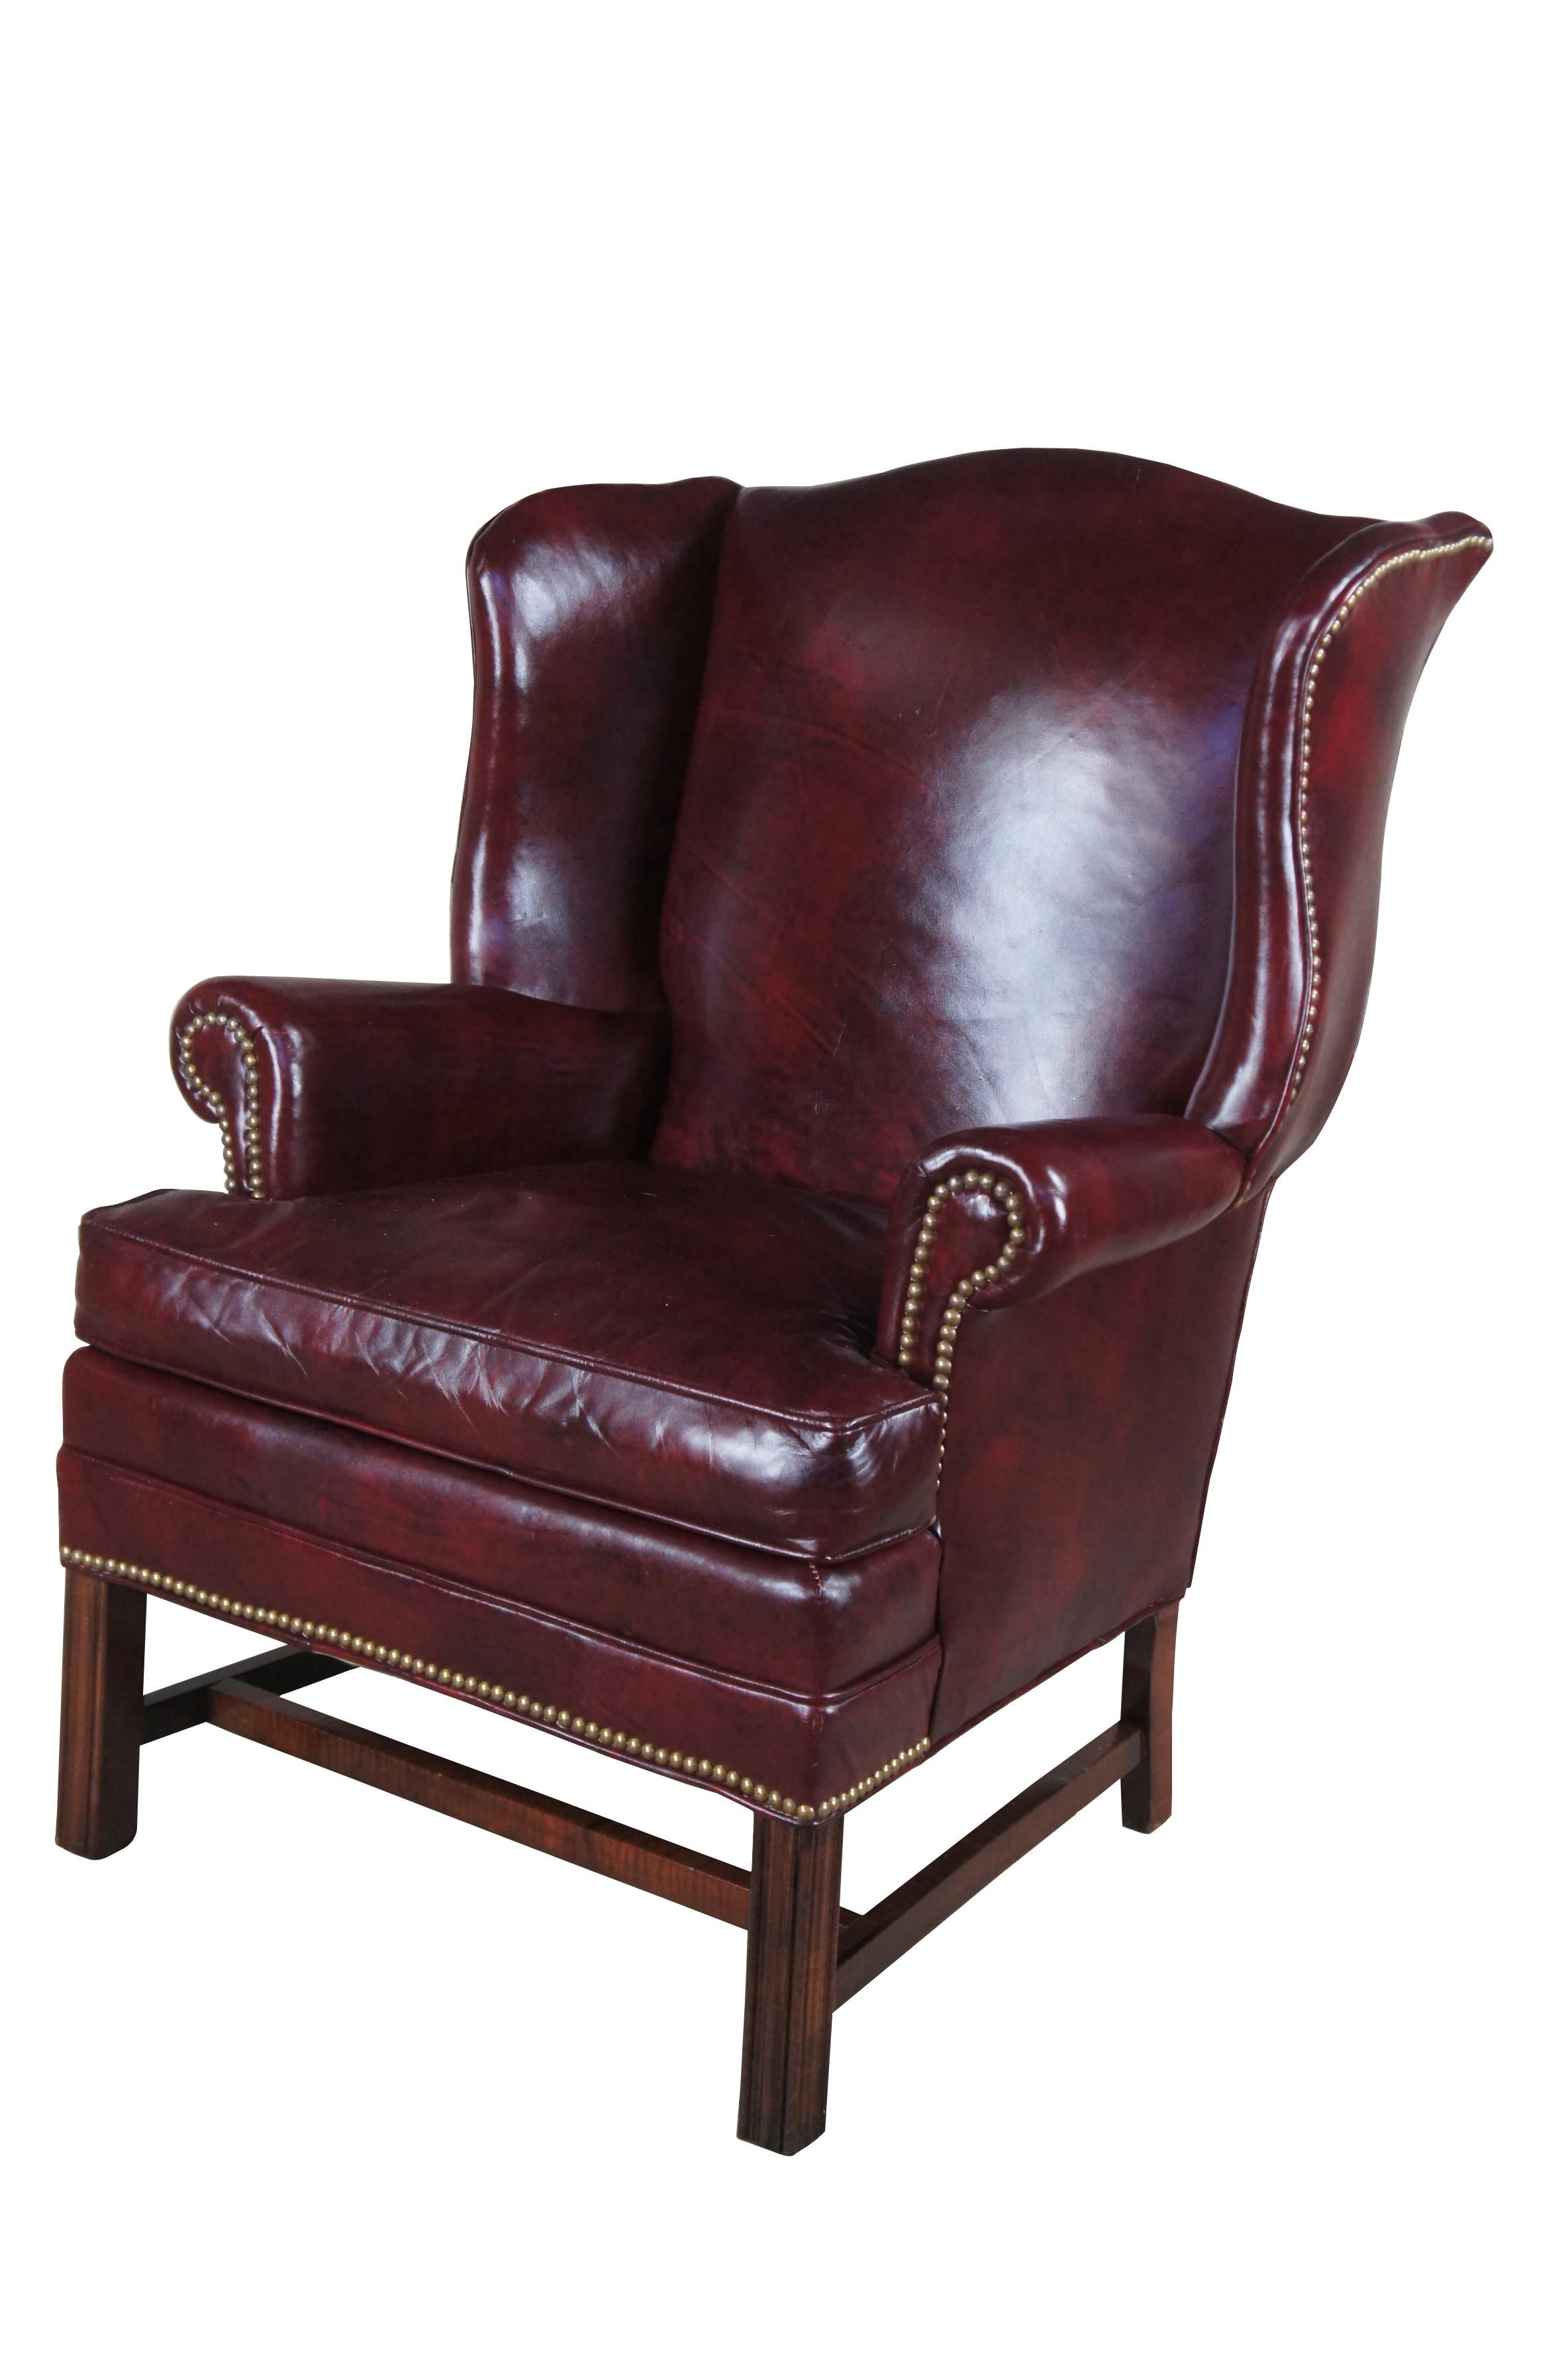 Chippendale Bracewell Burgundy Leather Nailhead Wingback Library Club Lounge Arm Chairs 